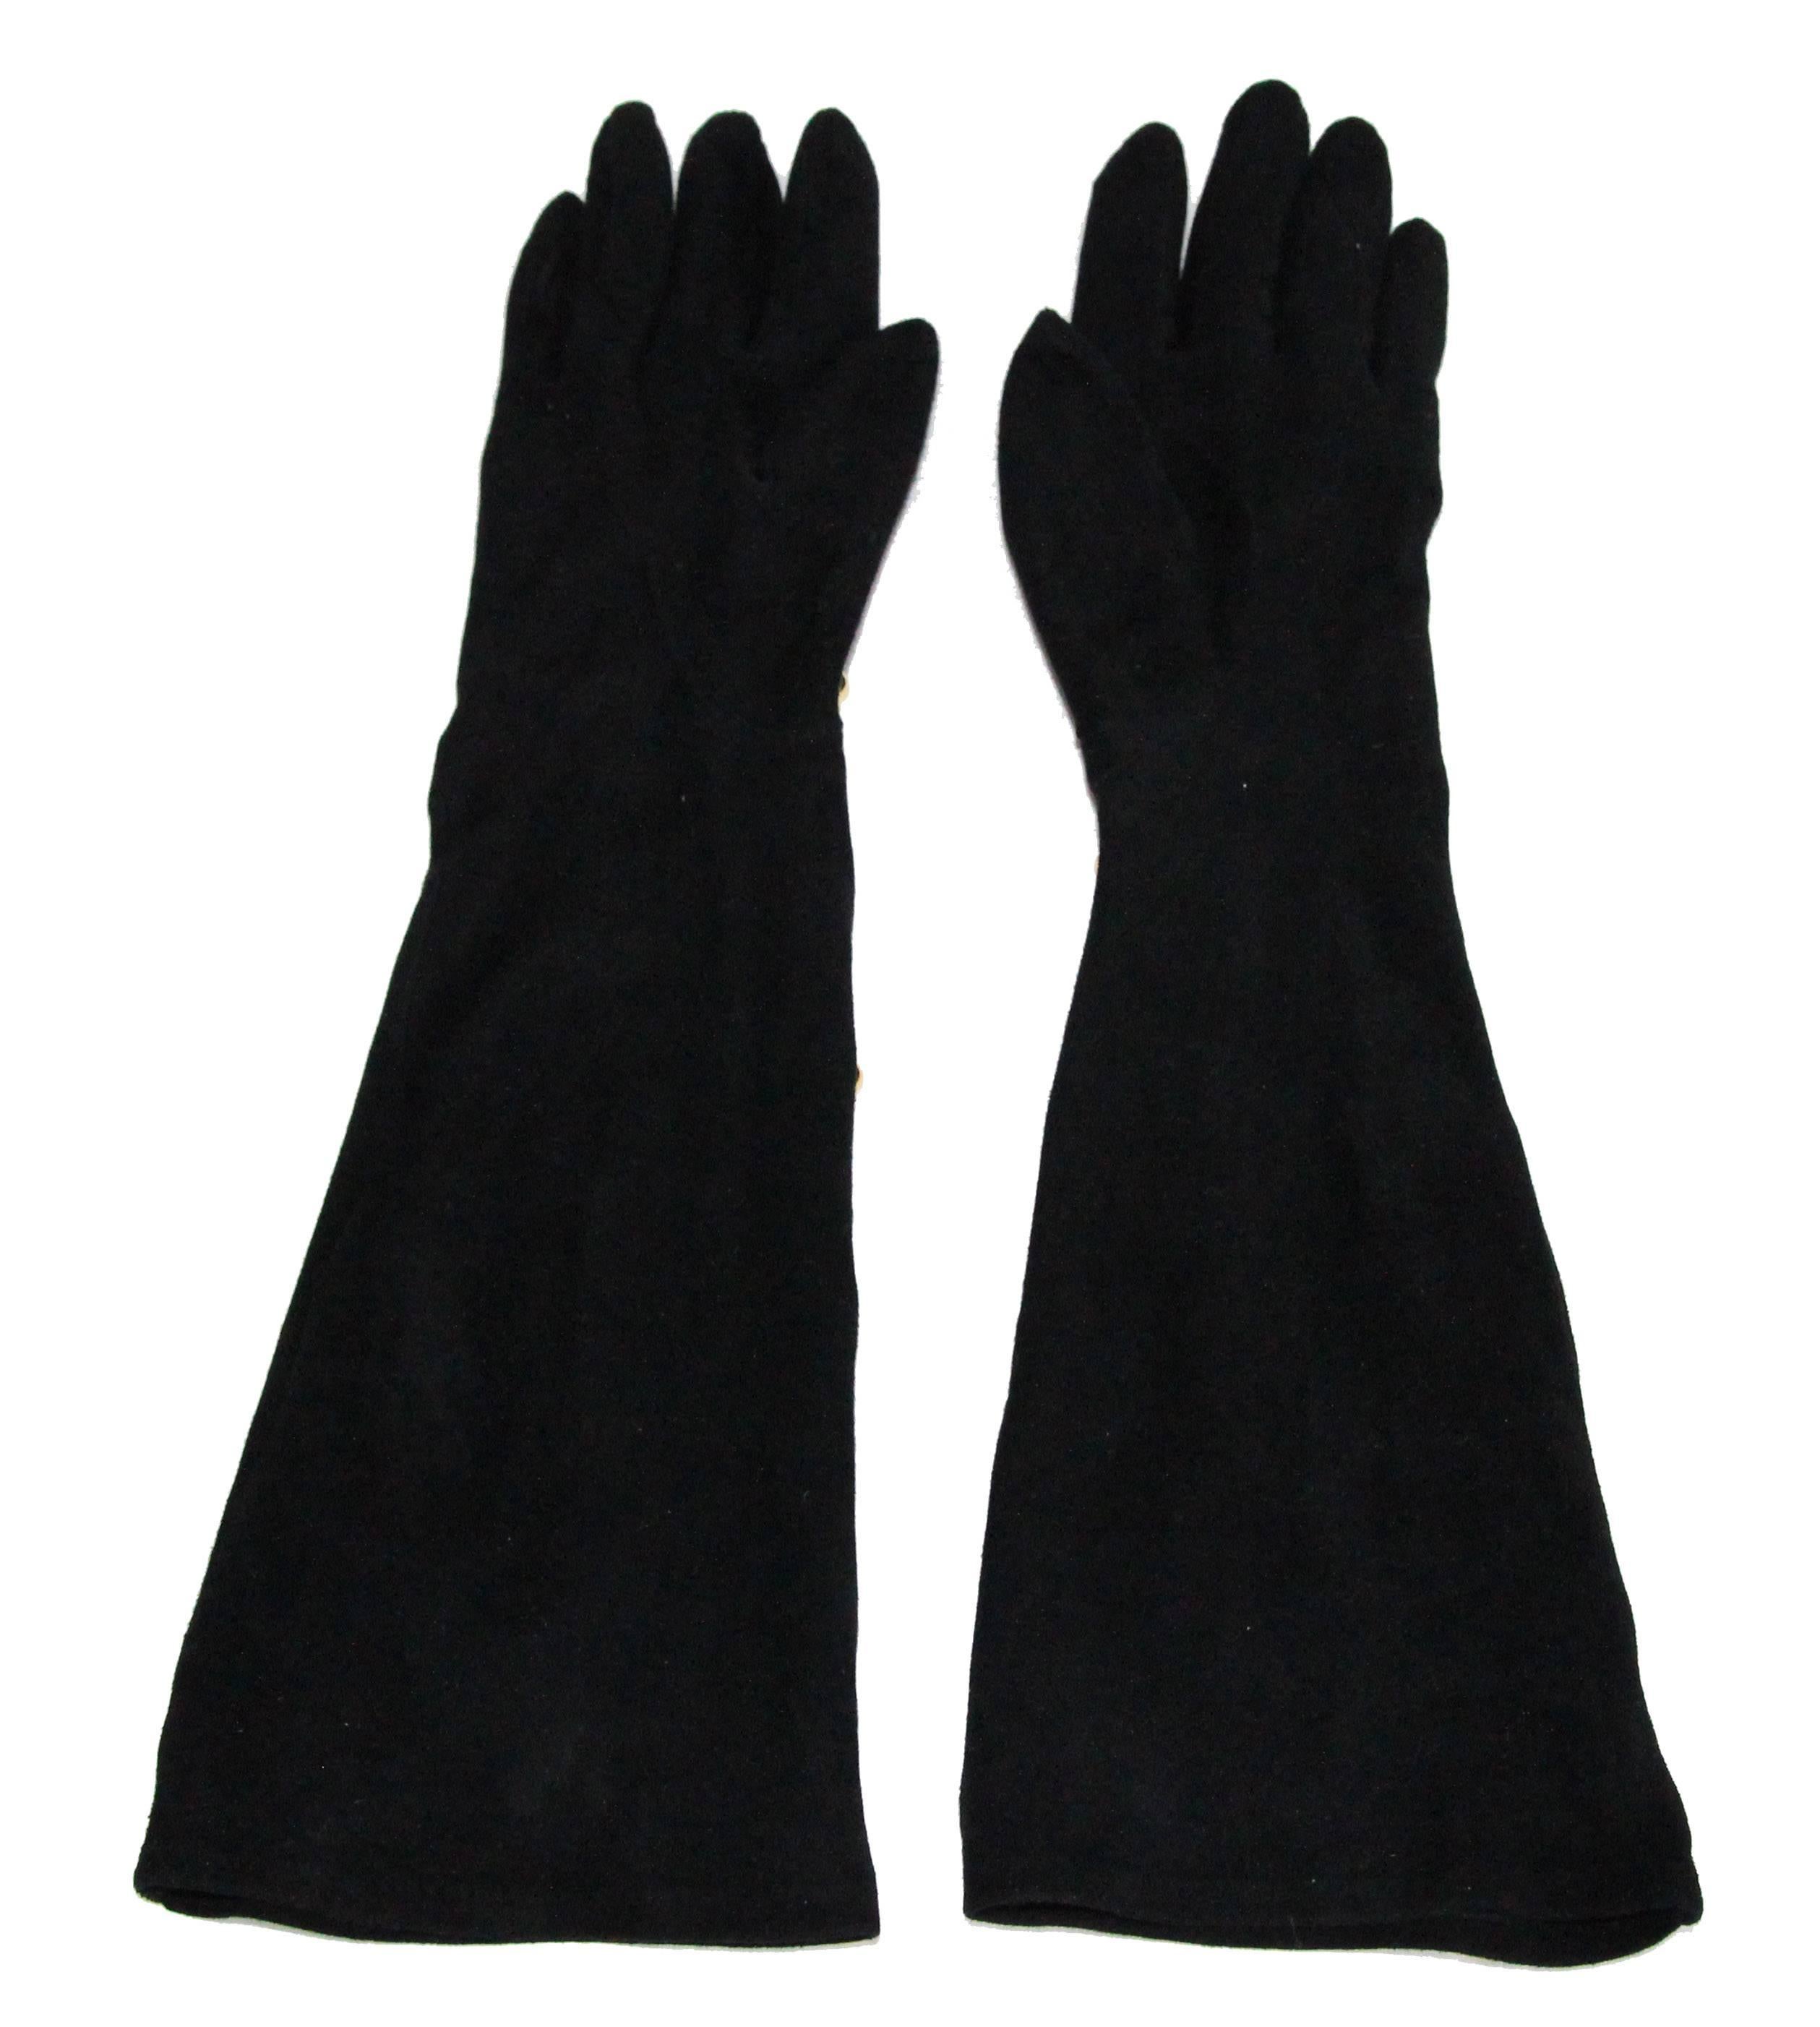 Exceptional & collectable Hermès vintage gloves. Made of black suede leather and gold plated metal beads. c. 1980. Excellent vintage condition.  Marked Hermès Paris Made in France. Size: 7 1/2. Total length: 43 cm - 17 in. 